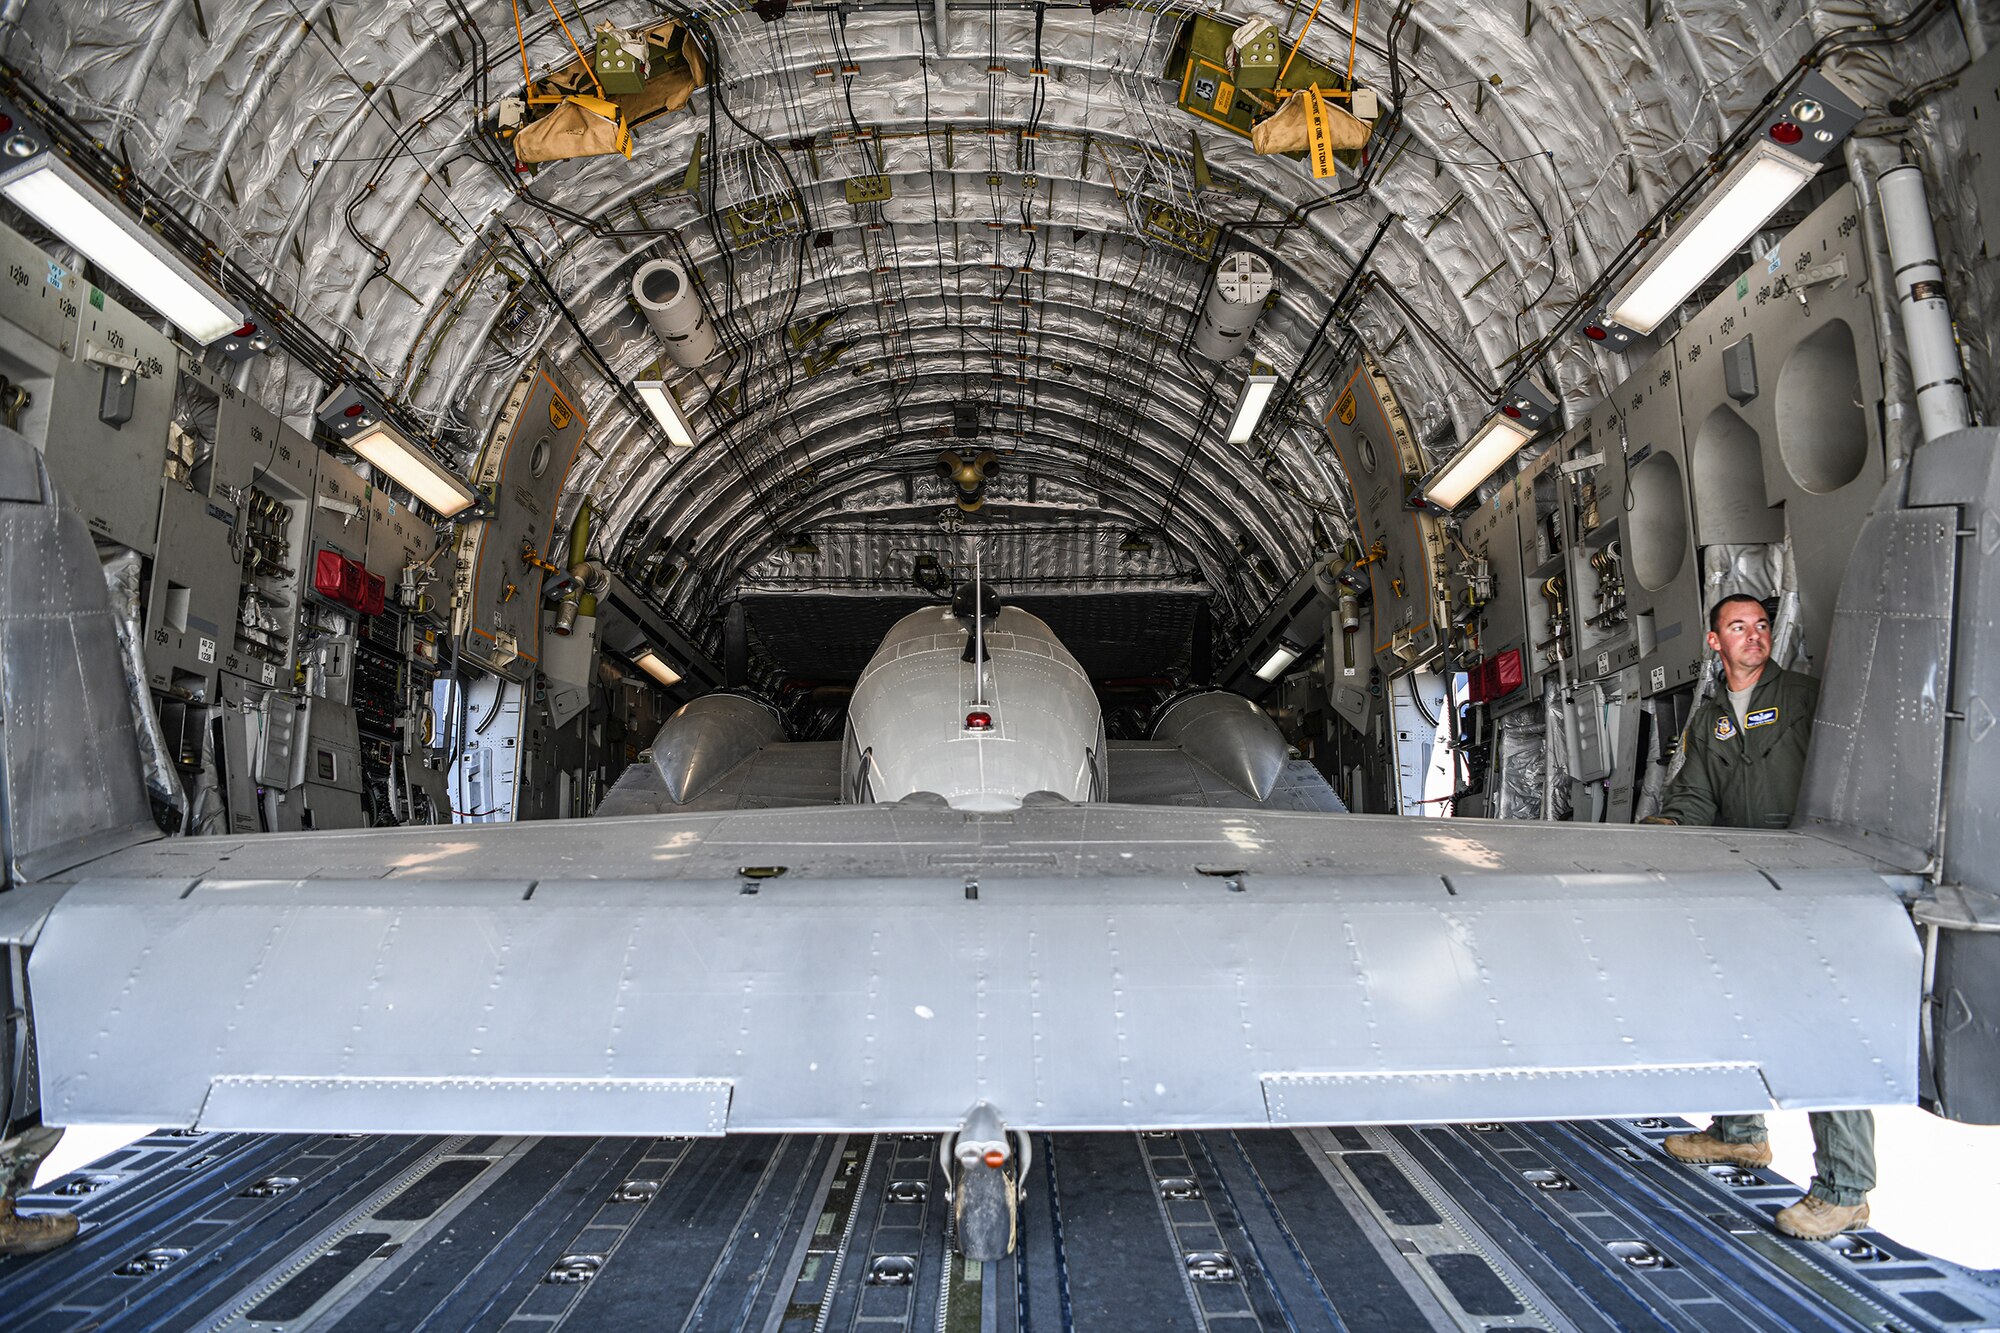 Tech. Sgt. Steven Murphy, 89th Airlift Squadron loadmaster, helps load a C-45H aircraft into the cargo area of a 445th Airlift Wing C-17 Globemaster III Sept. 30, 2021. The C-45H aircraft was loaned by the National Museum of the U.S.A.F. and sent to the Museum of Aviation at Robins Air Force Base, Ga.